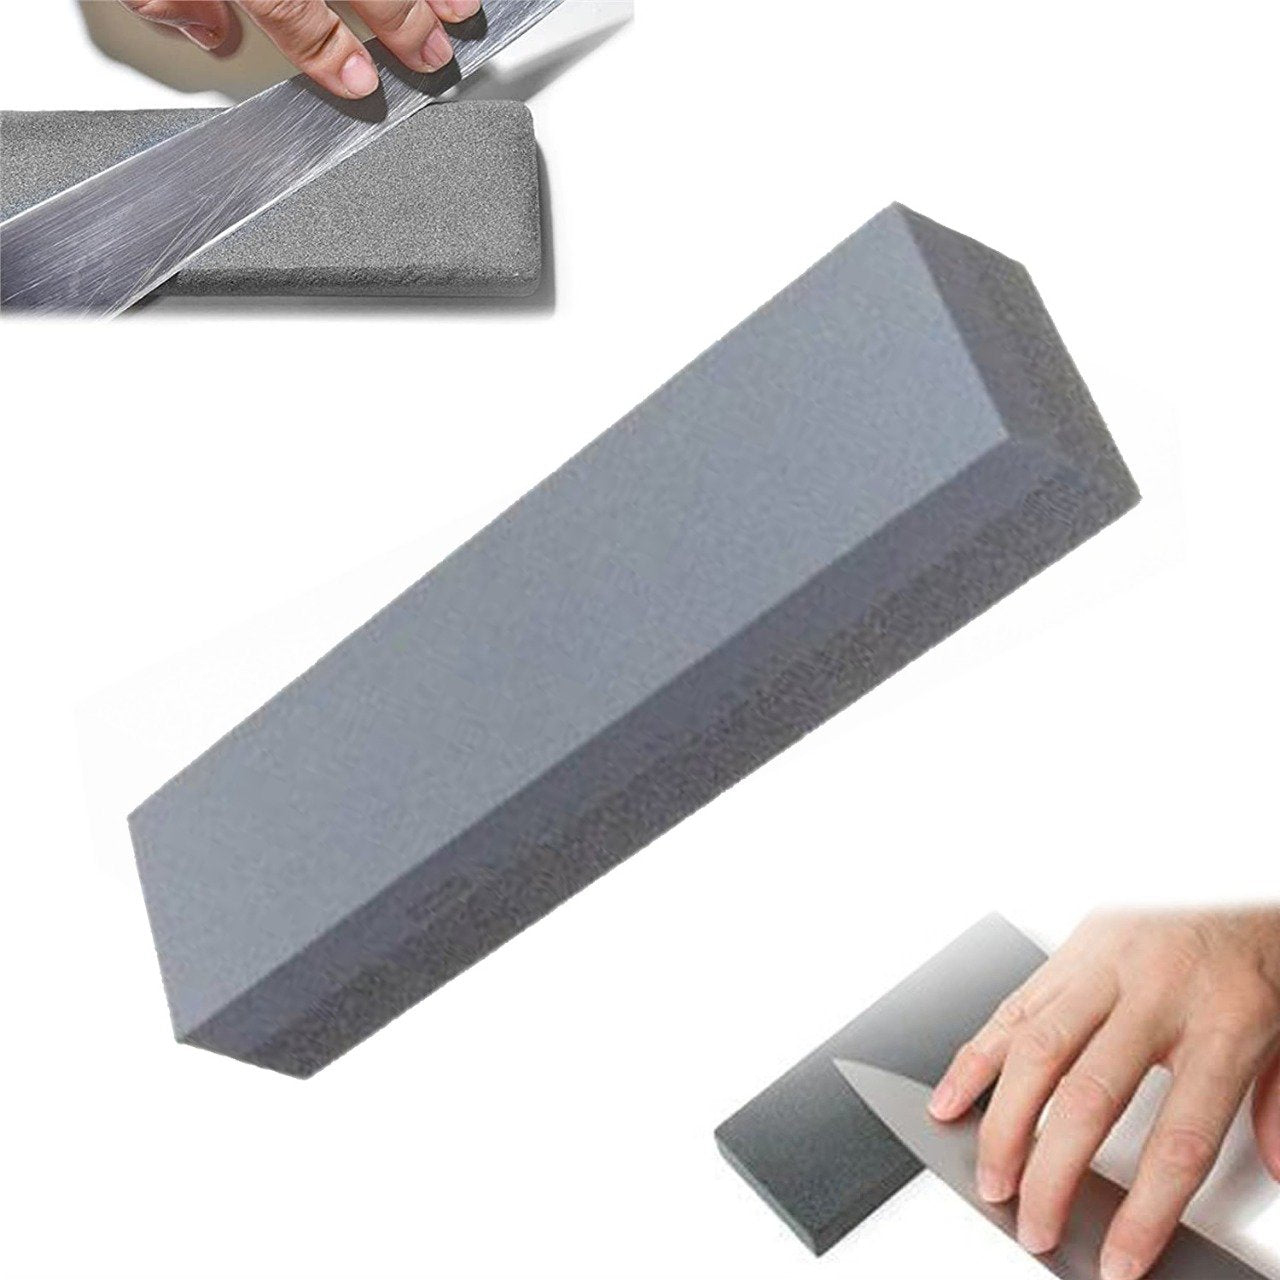 1542 Combination Stone Sharpener for Both Knives and Tool - SkyShopy